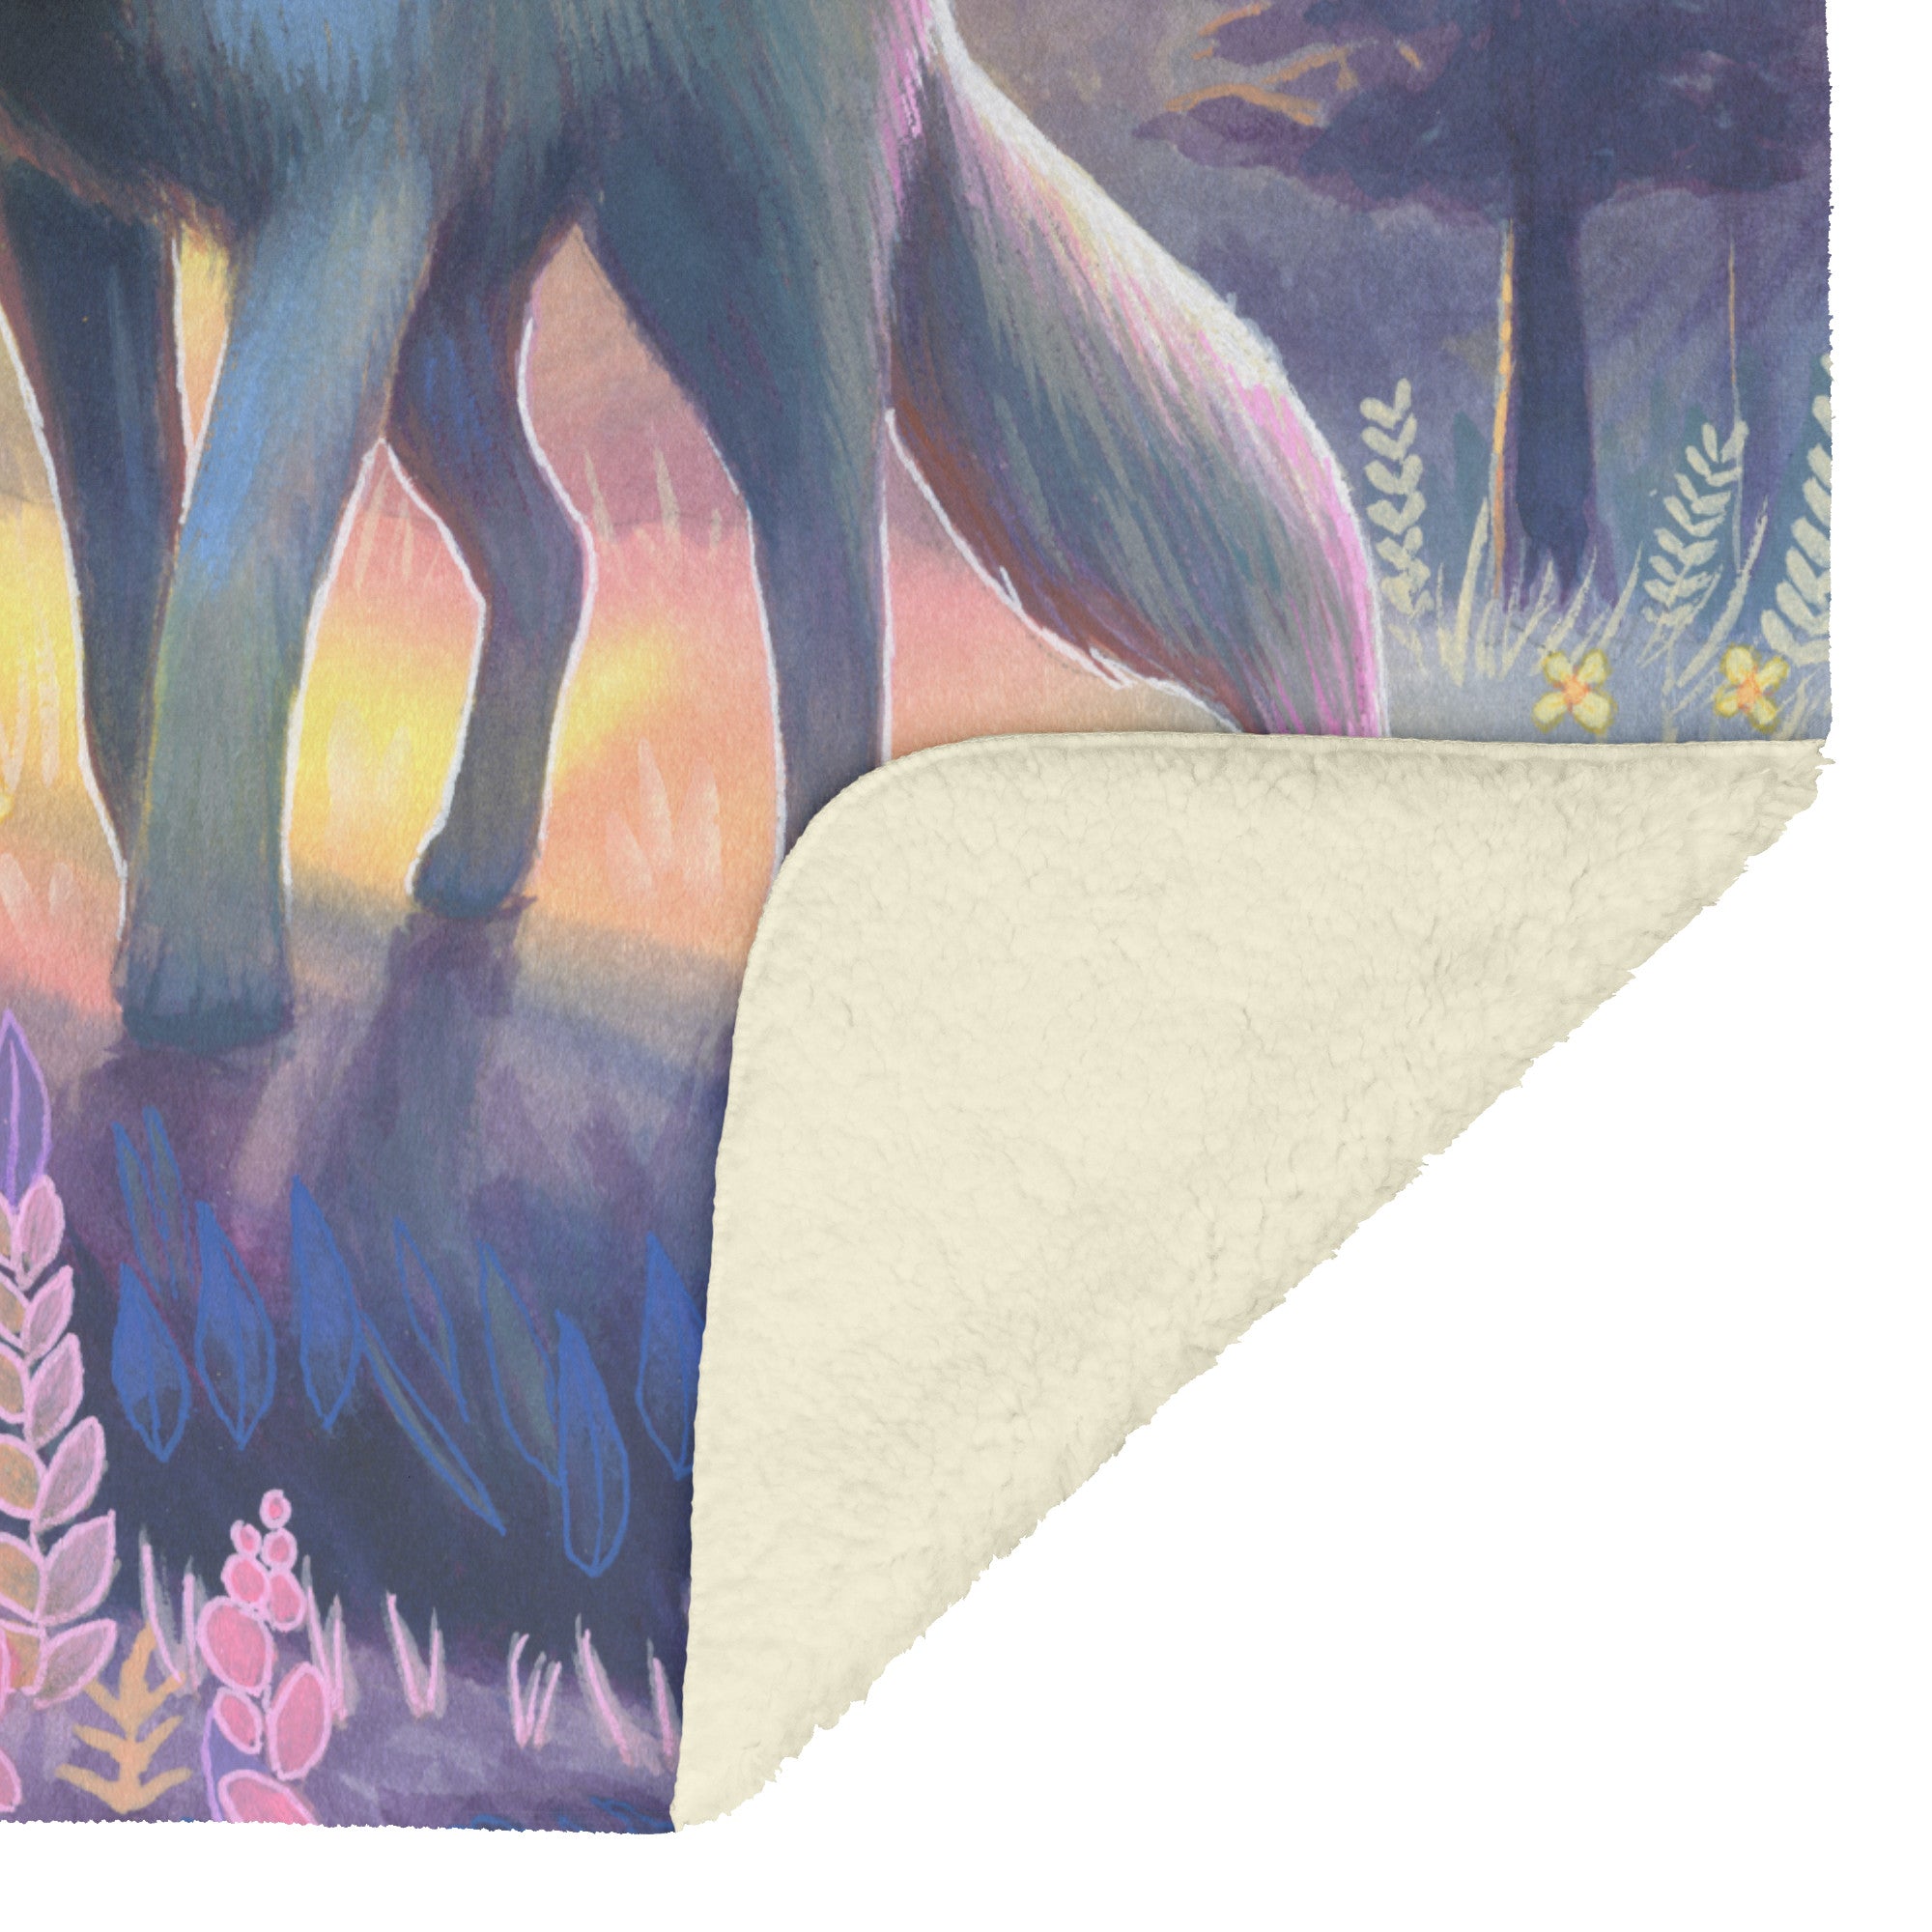 A wolf fleece blanket featuring a watercolor painting of a forest scene at dusk with abstract shapes and vivid colors partially covered by the folded corner of the blanket.